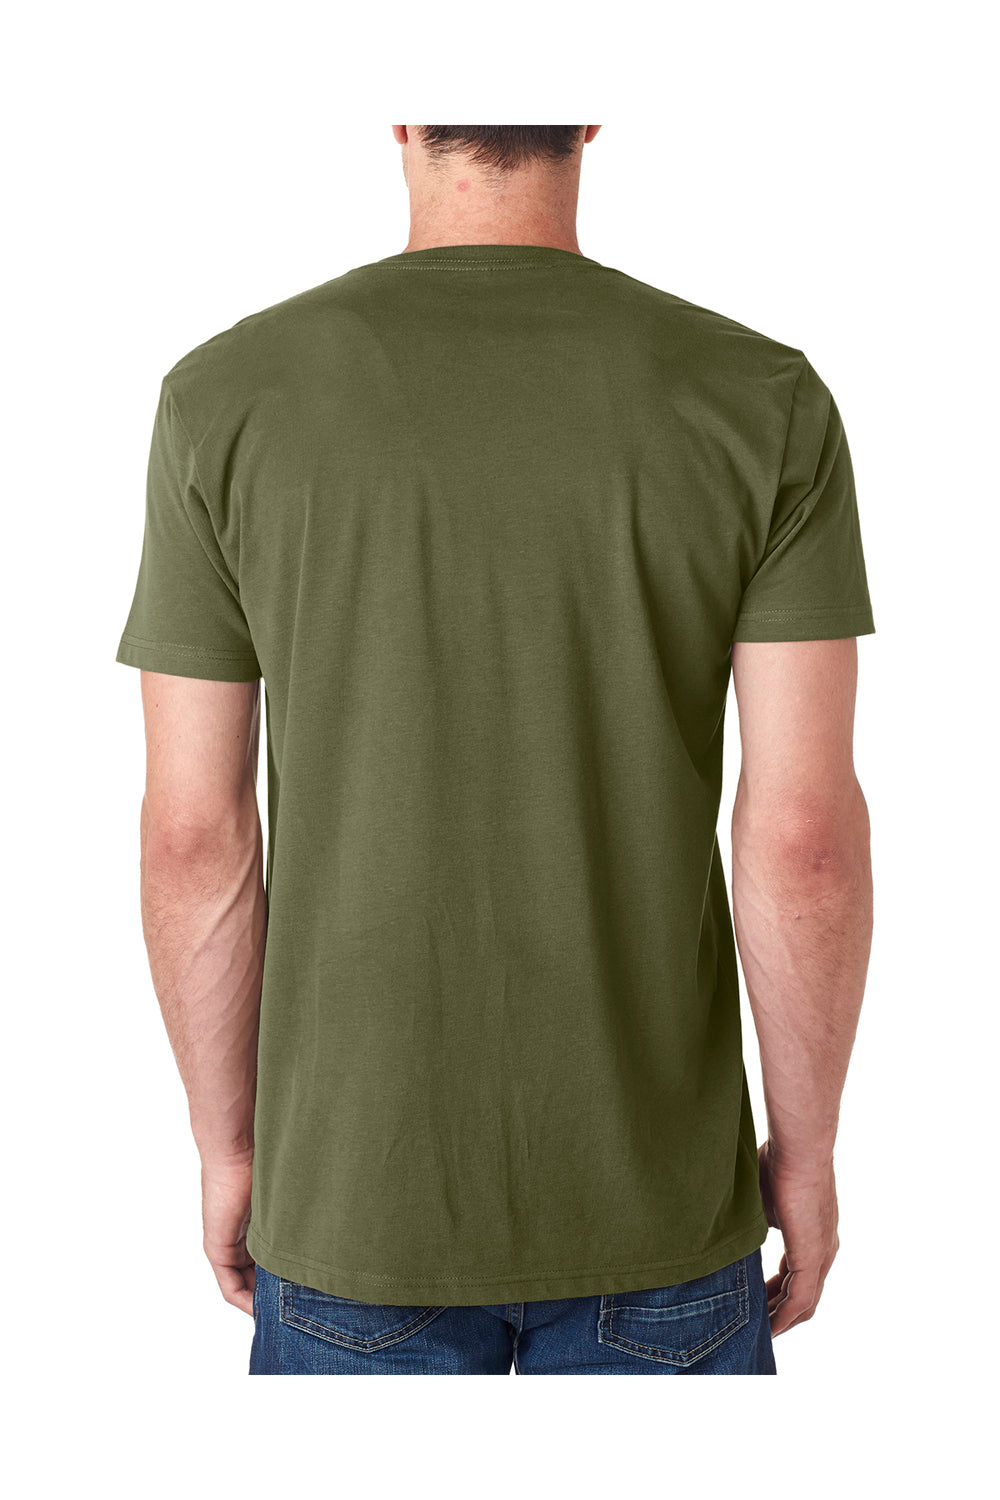 Next Level 6440 Mens Sueded Jersey Short Sleeve V-Neck T-Shirt Military Green Back